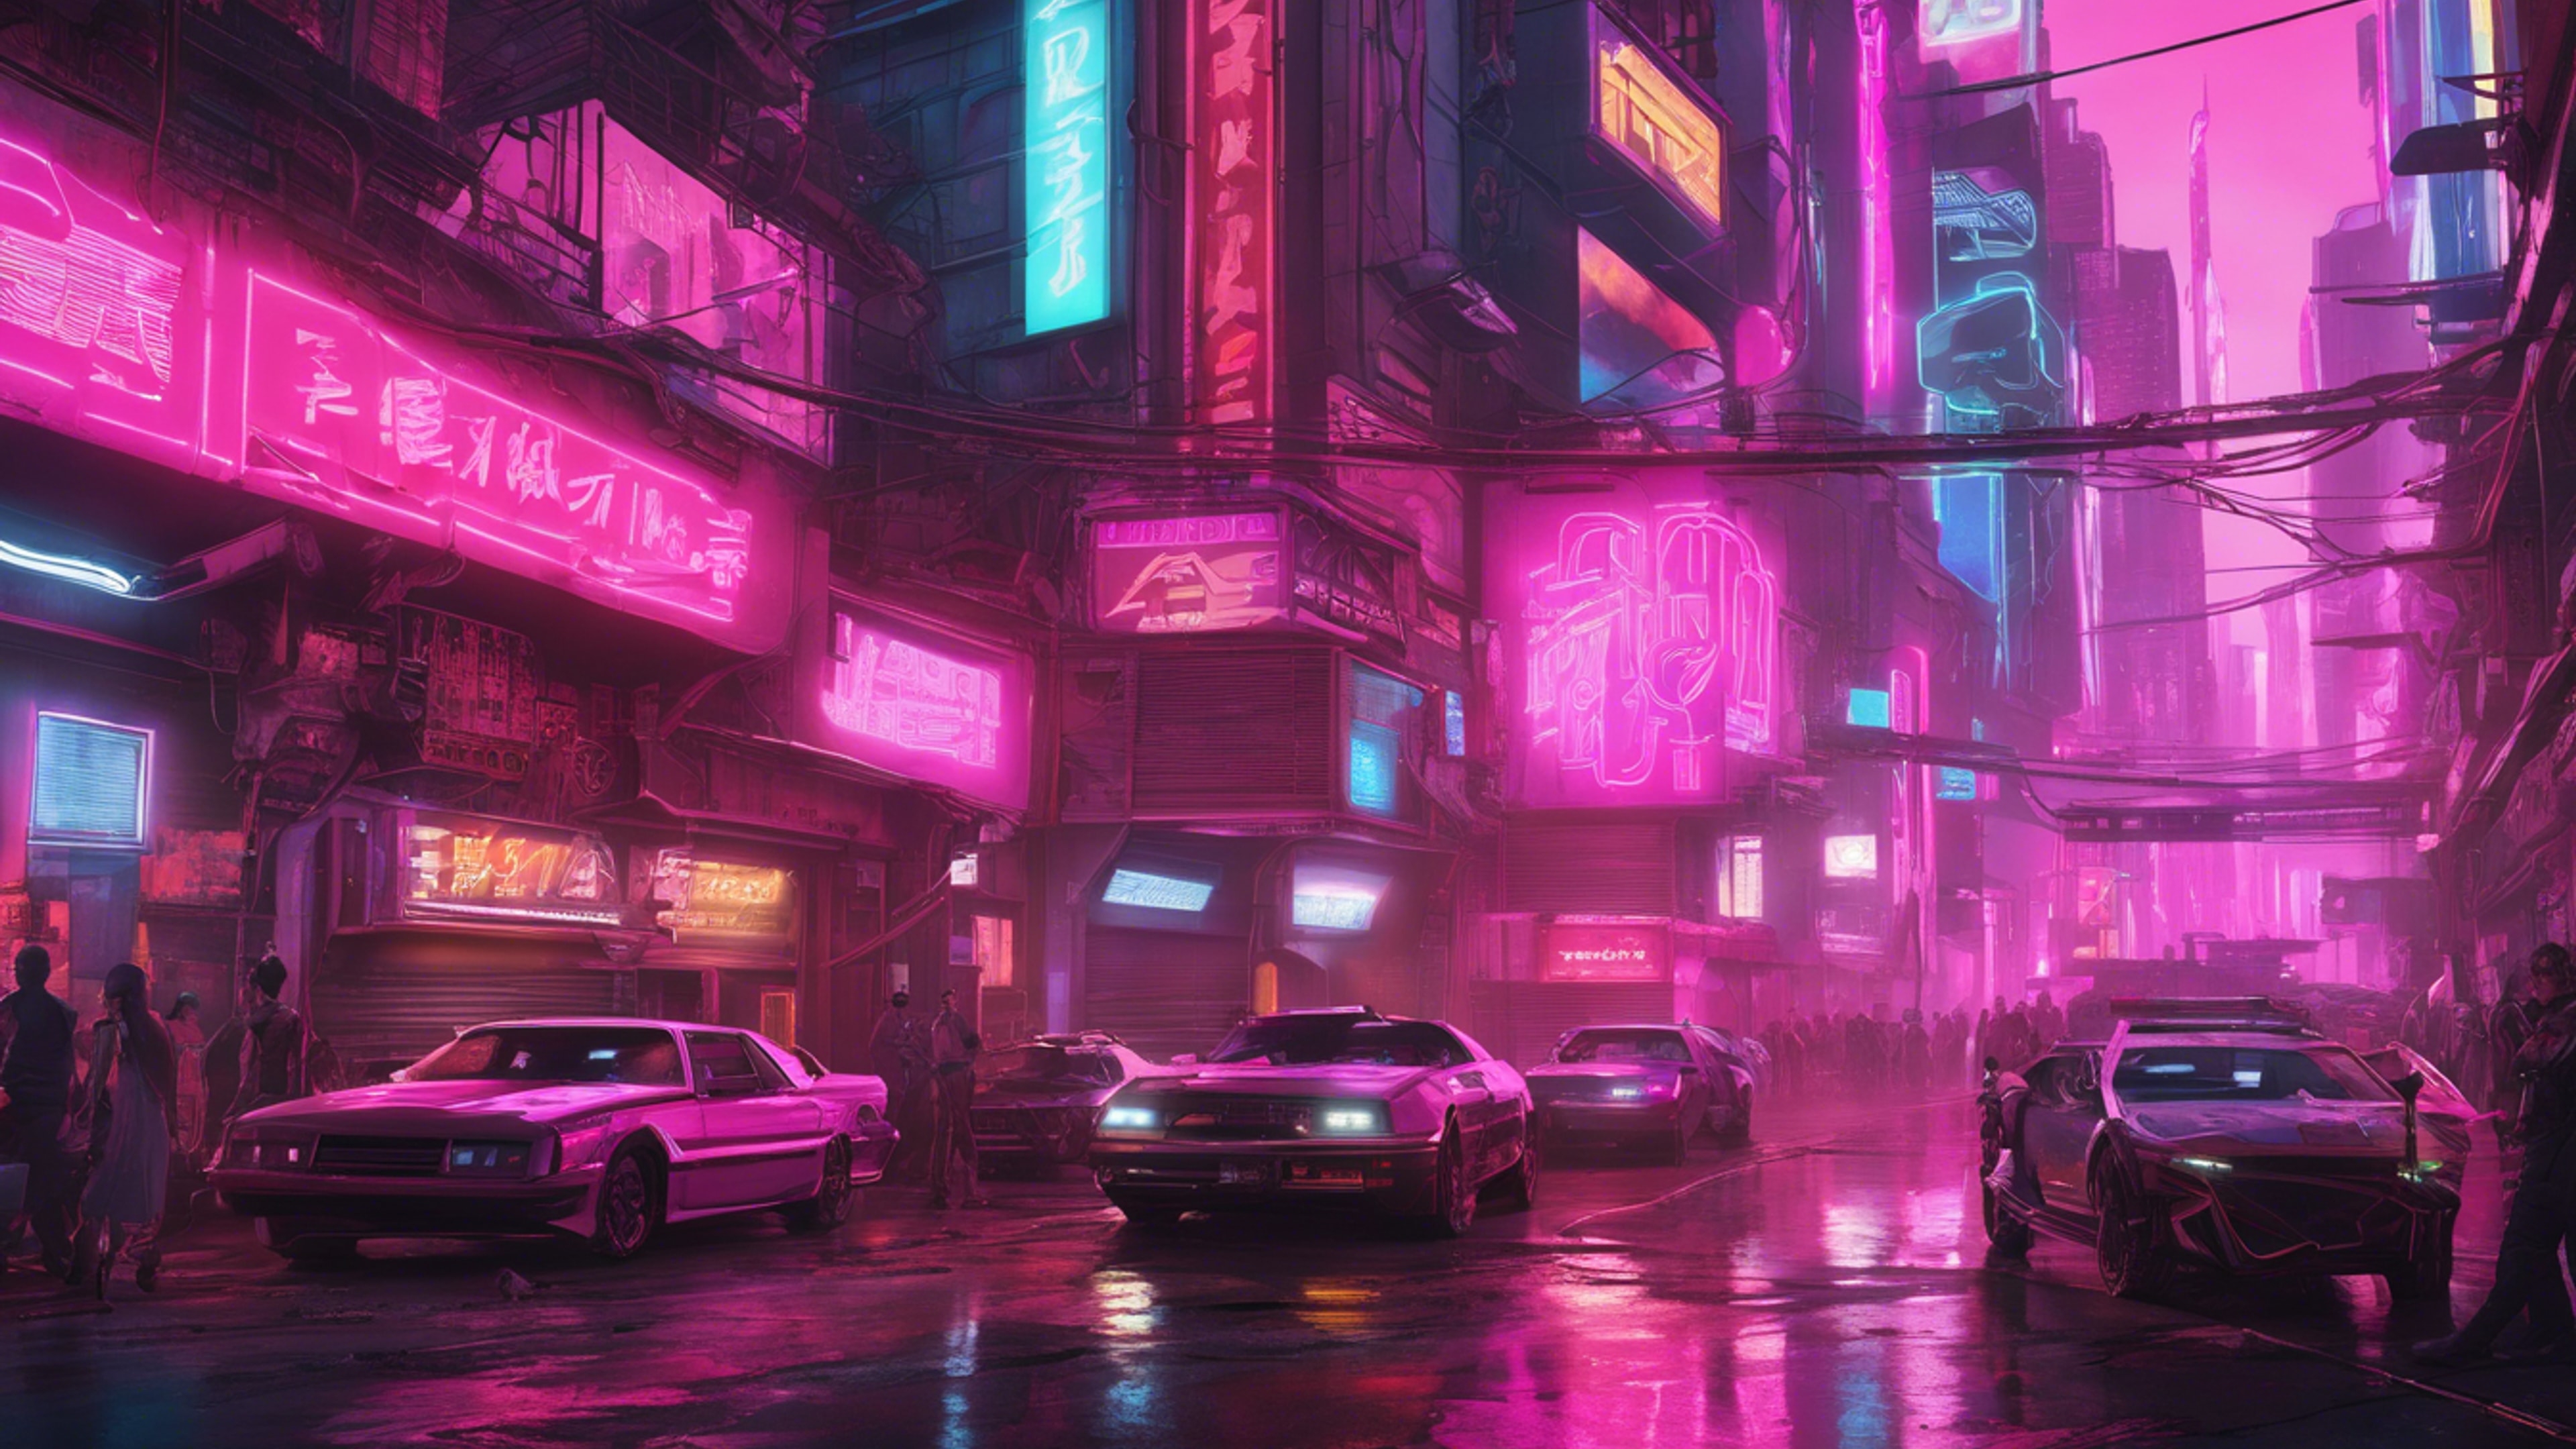 A wide-angle view of a bustling city street in the future, dominated by pink neon signs. Tapeta[5759e15553a14a8aa13a]